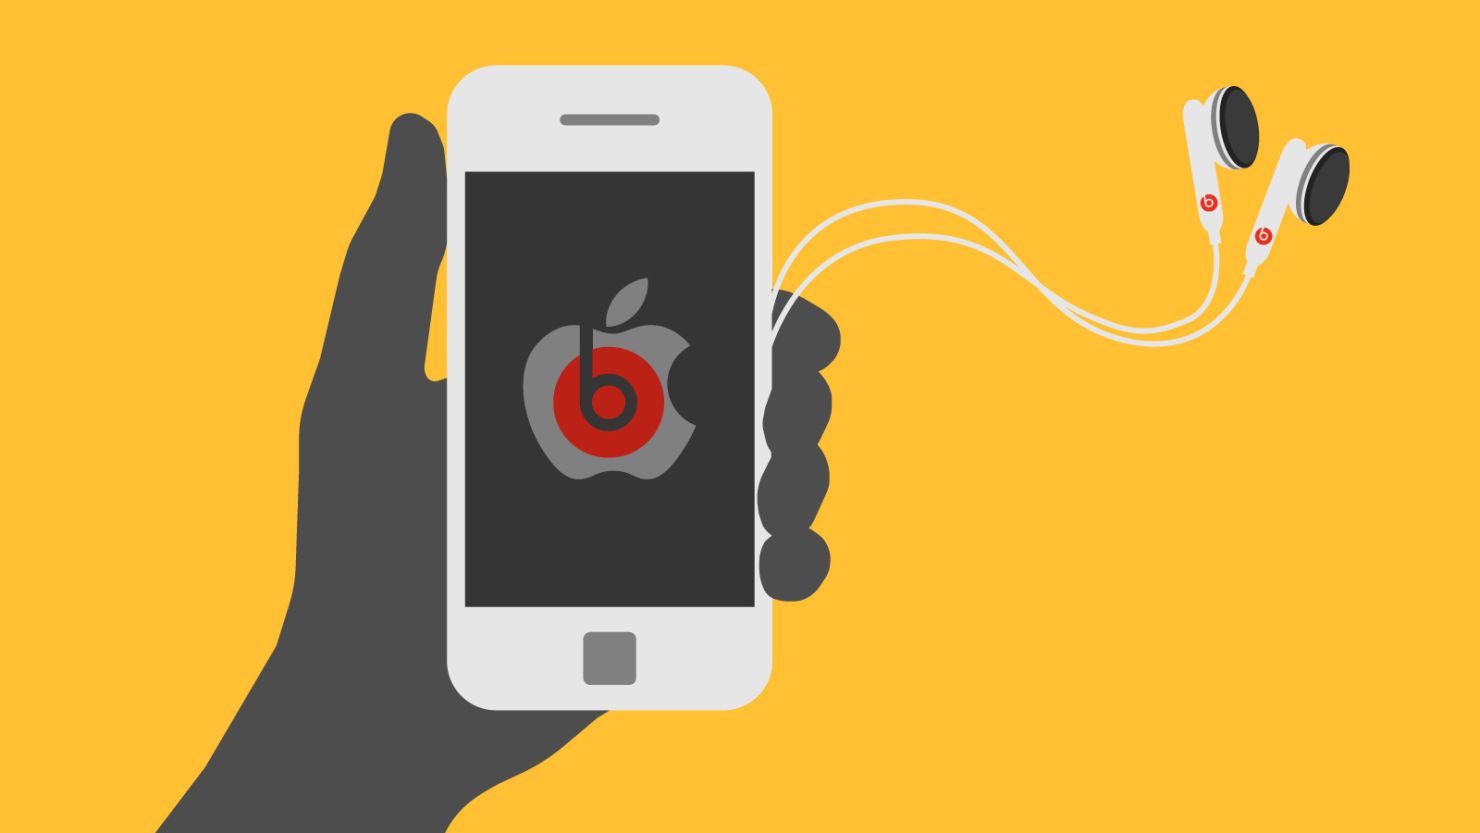 Reports surfaced this week that a $3.2 billion deal was in the works for Apple to scoop up Beats Electronics.